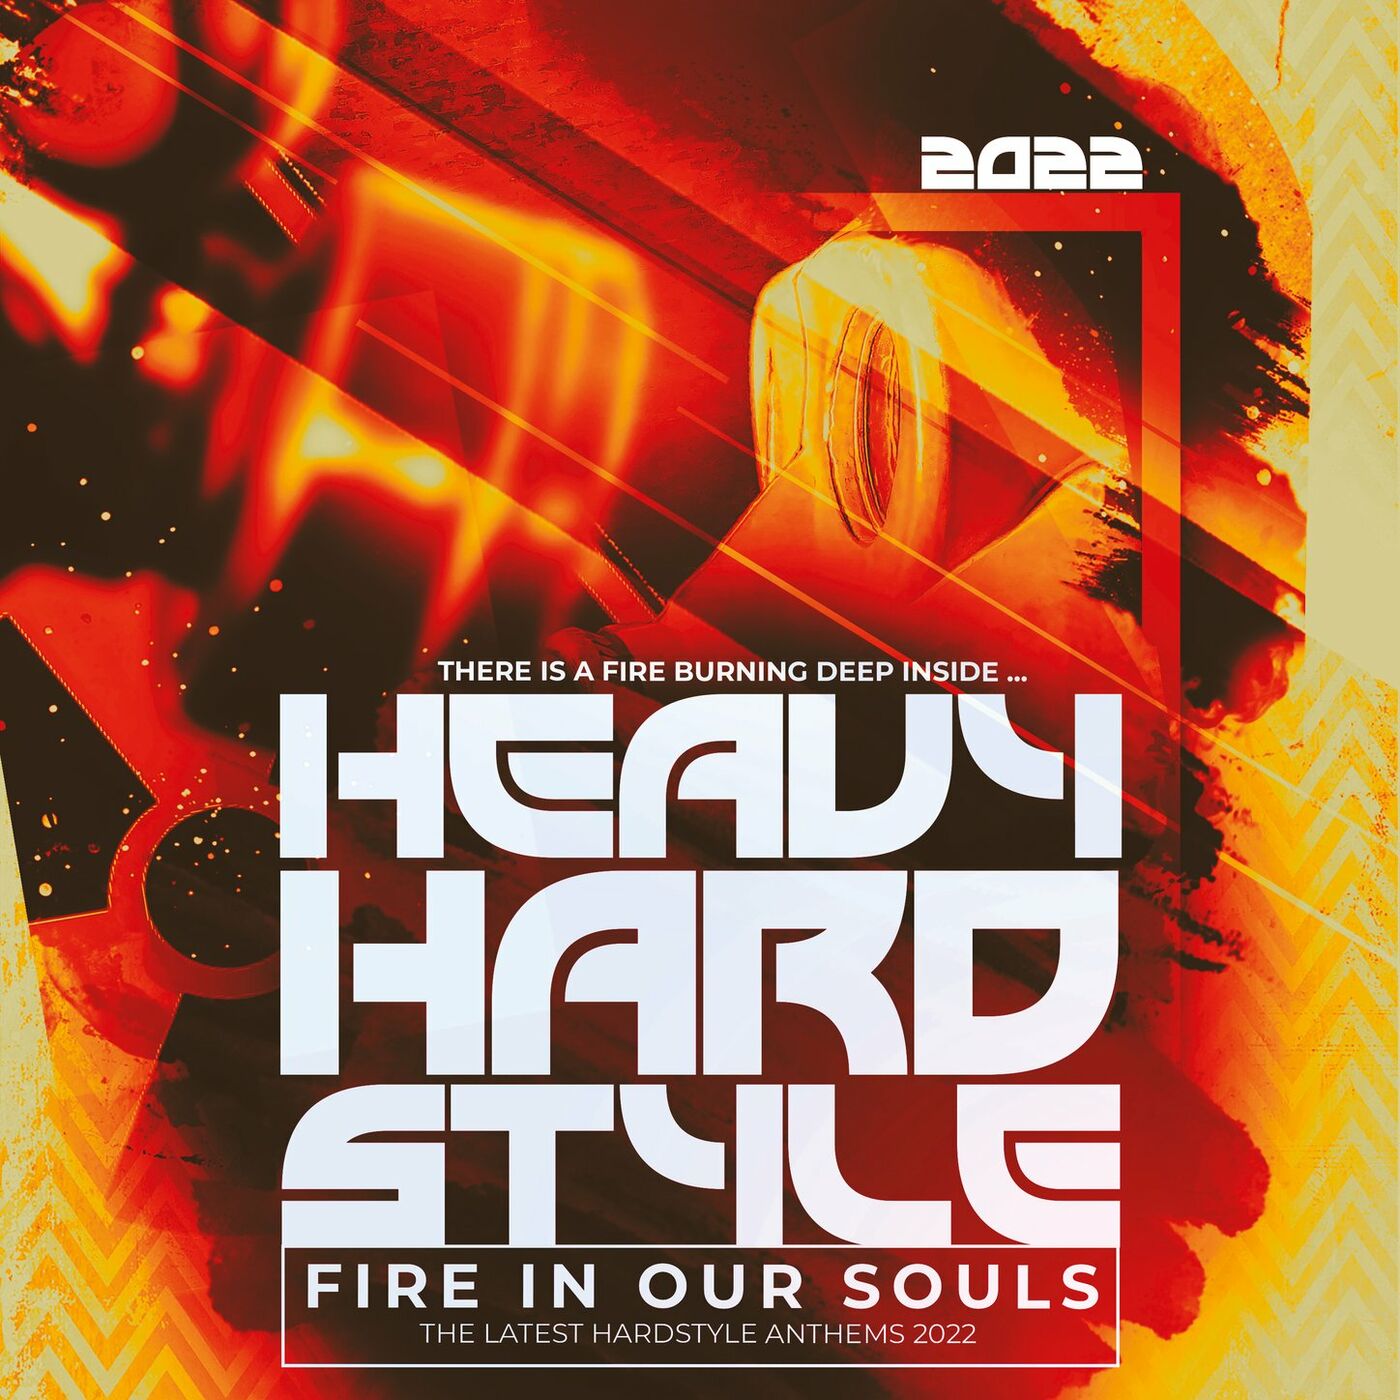 VA - Heavy Hardstyle 2022 (Fire In Our Souls) (2022)